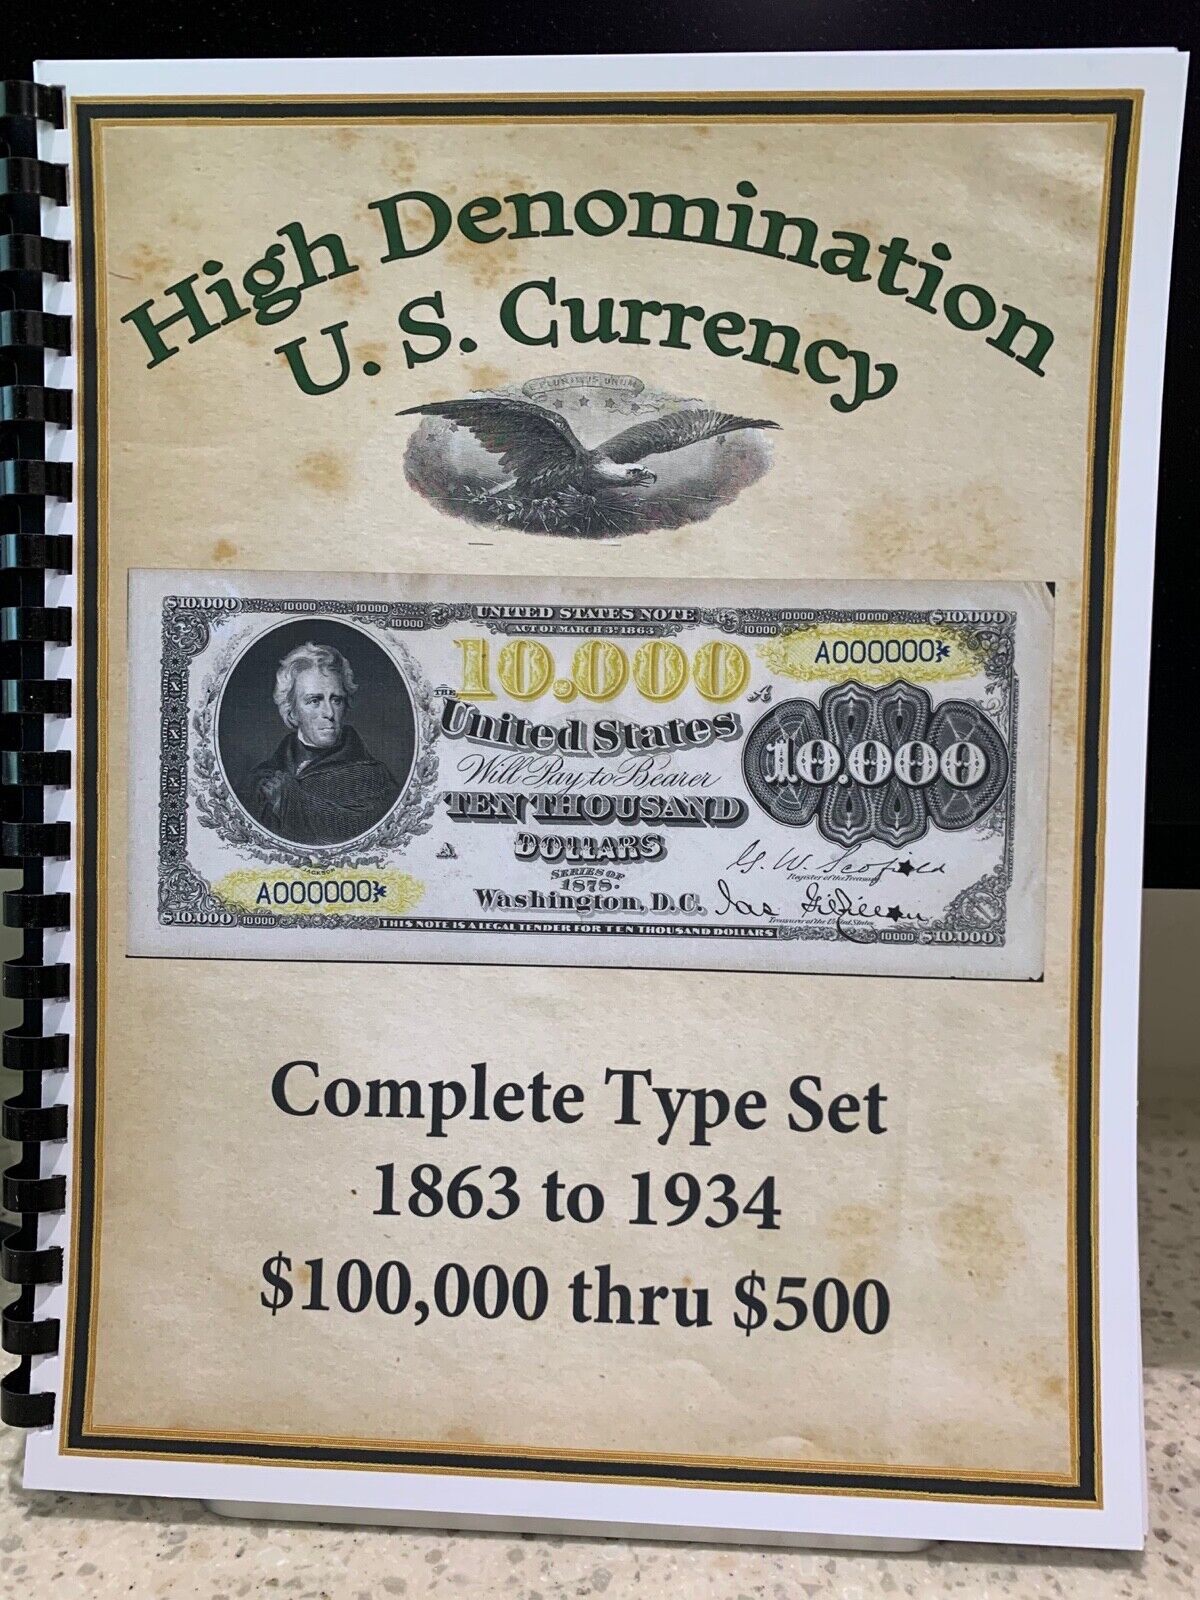 High Denomination Large 2 Size Us Currency Book 8-1/2 X 11" $100,000 Thru $500